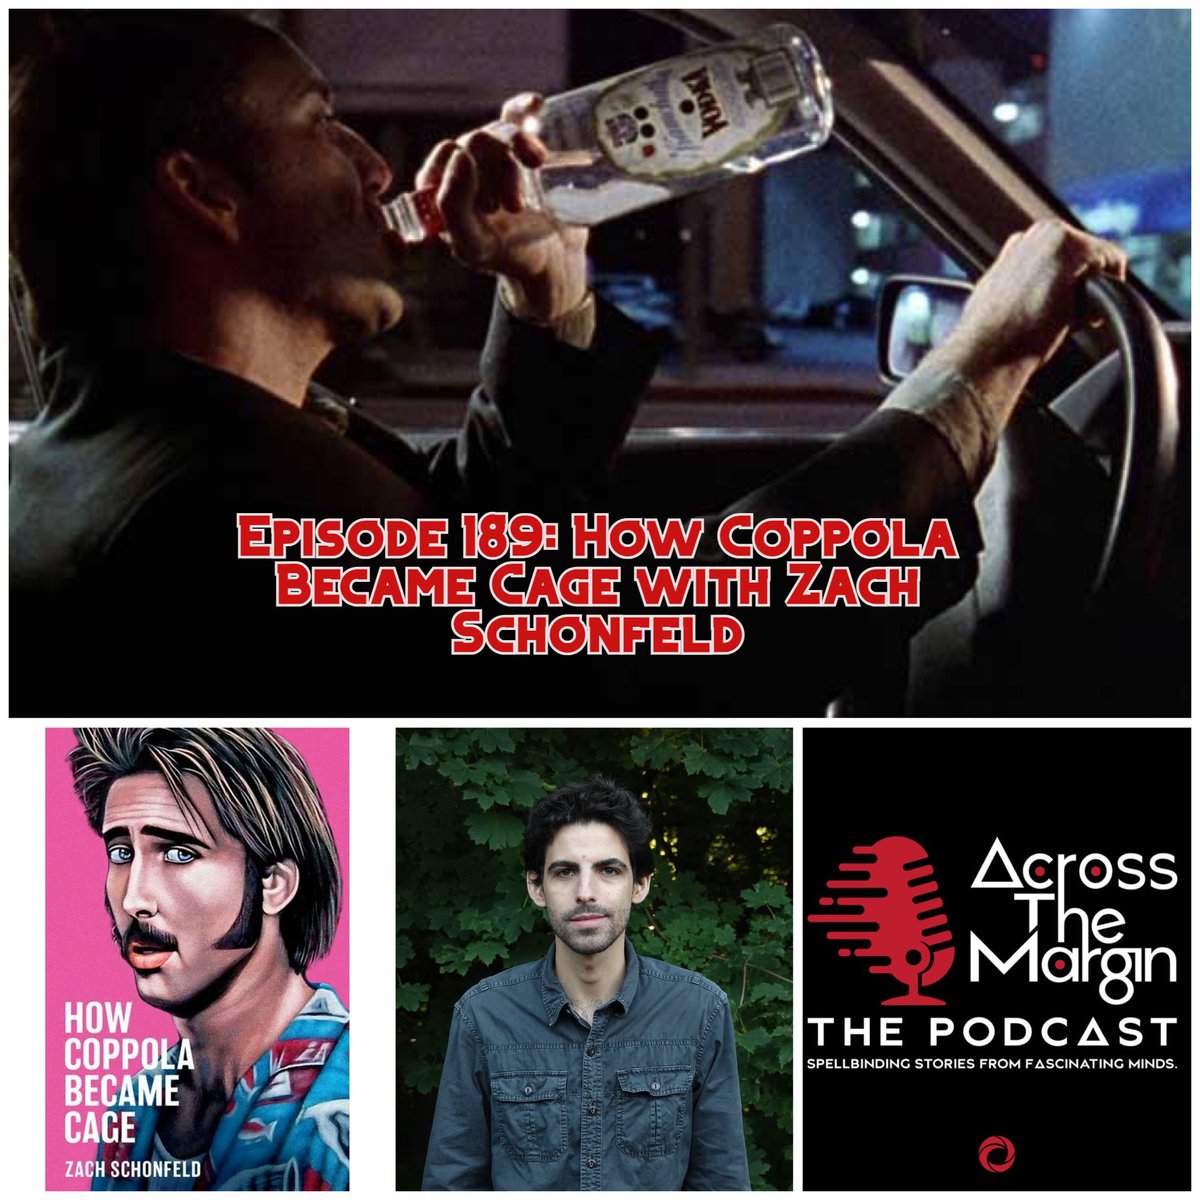 Across The Margin: The Podcast celebrates one of the most enigmatic actors in the history of cinema with the author of How Coppola Became Cage, Zach Schonfeld! @zzzzaaaacccchhh @osirispod Apple:podcasts.apple.com/us/podcast/acr… Spotify:open.spotify.com/episode/22zIgA…